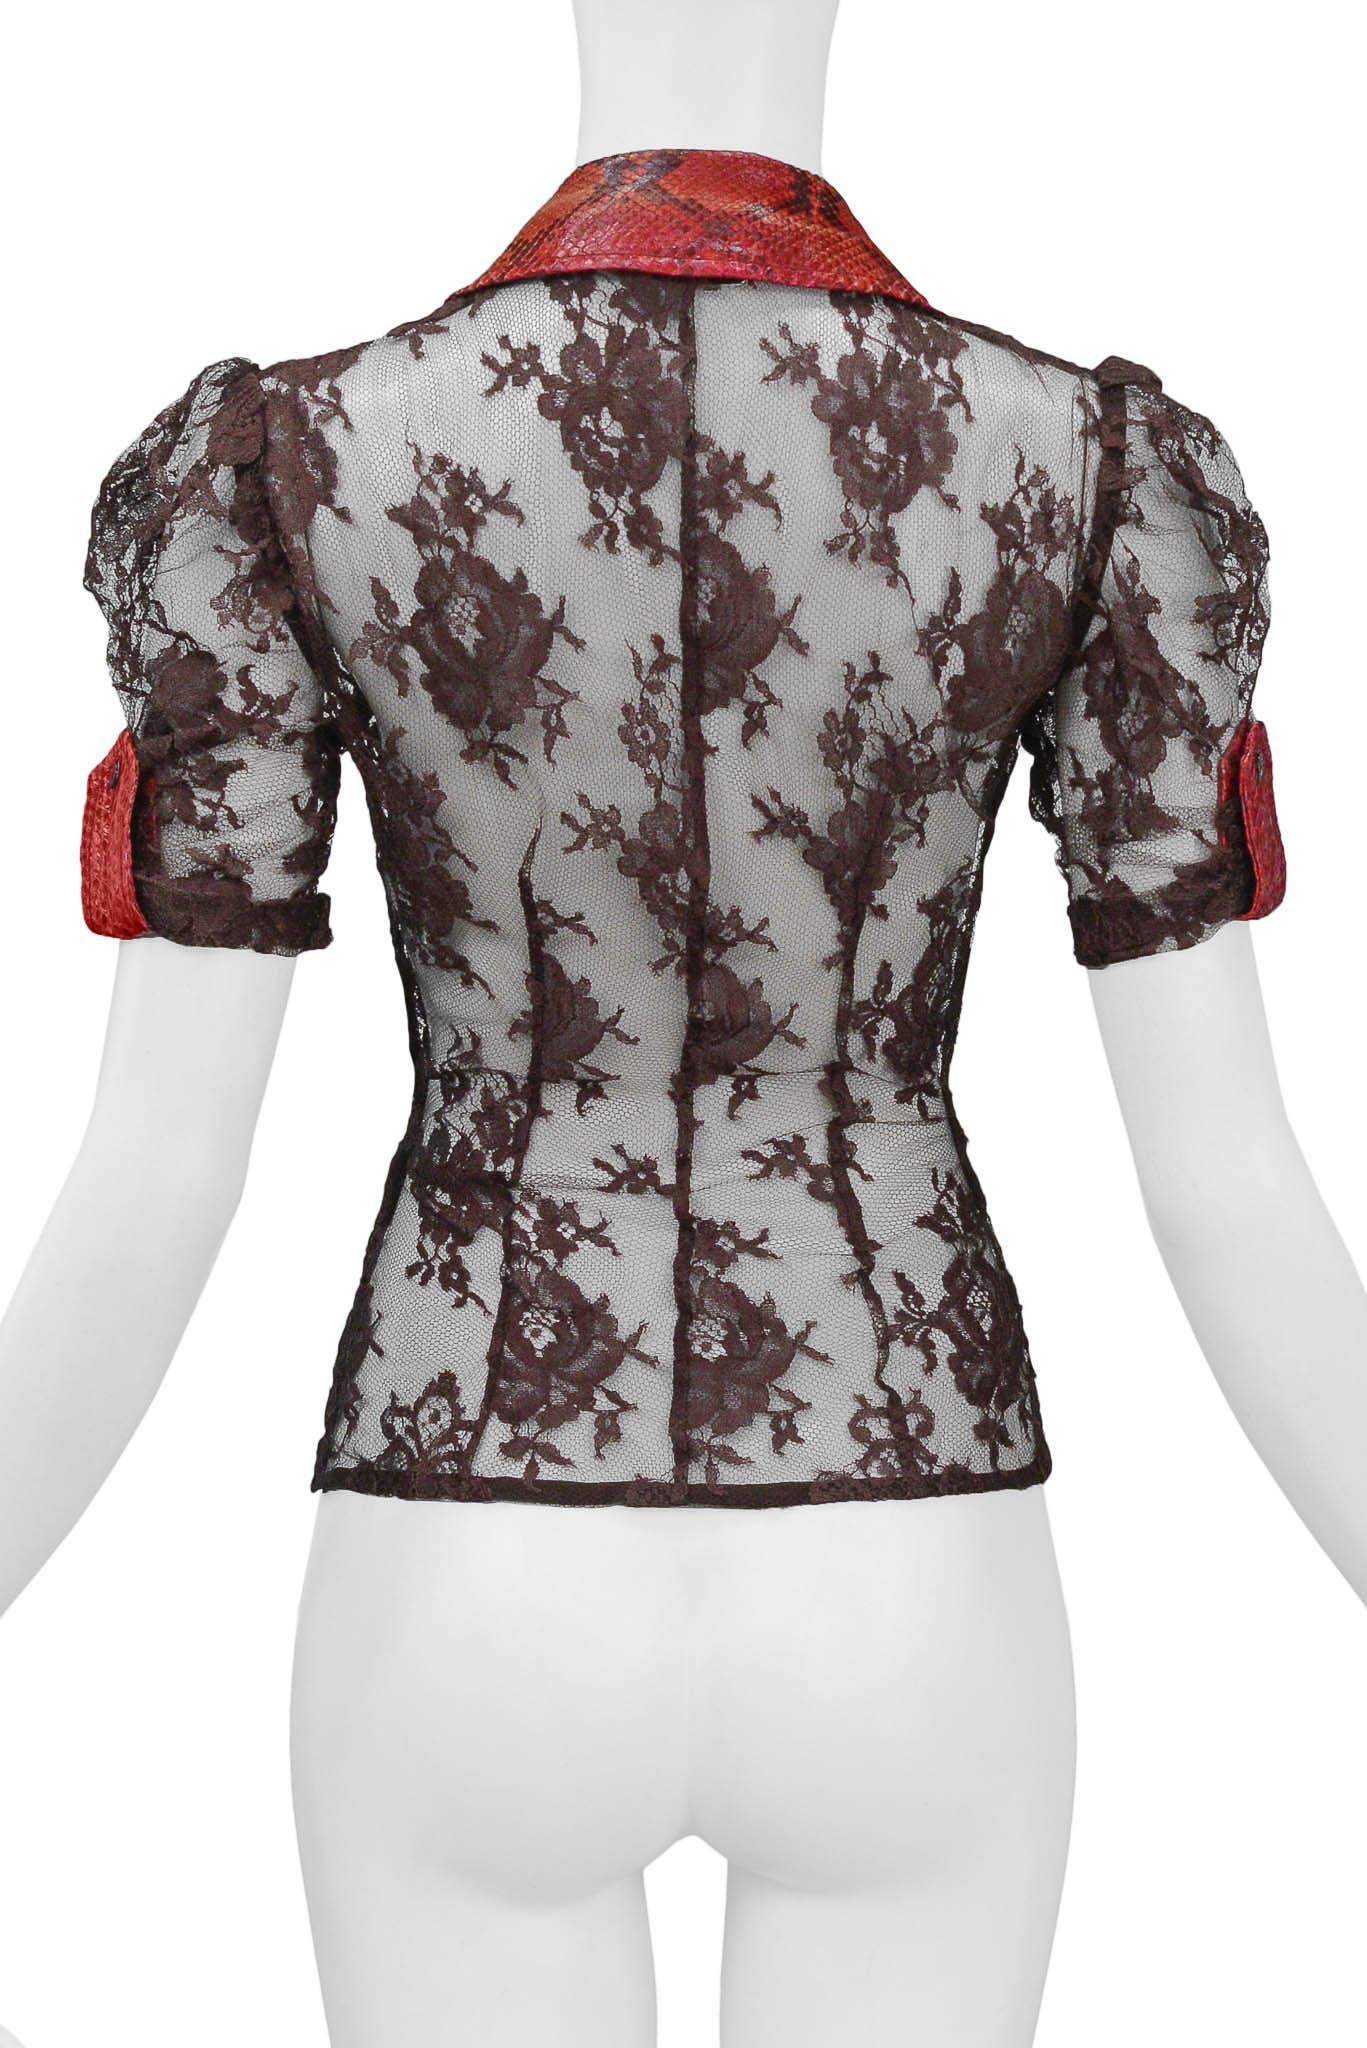 Women's Dolce & Gabbana Brown Lace Top With Red Python Trim 2005 For Sale